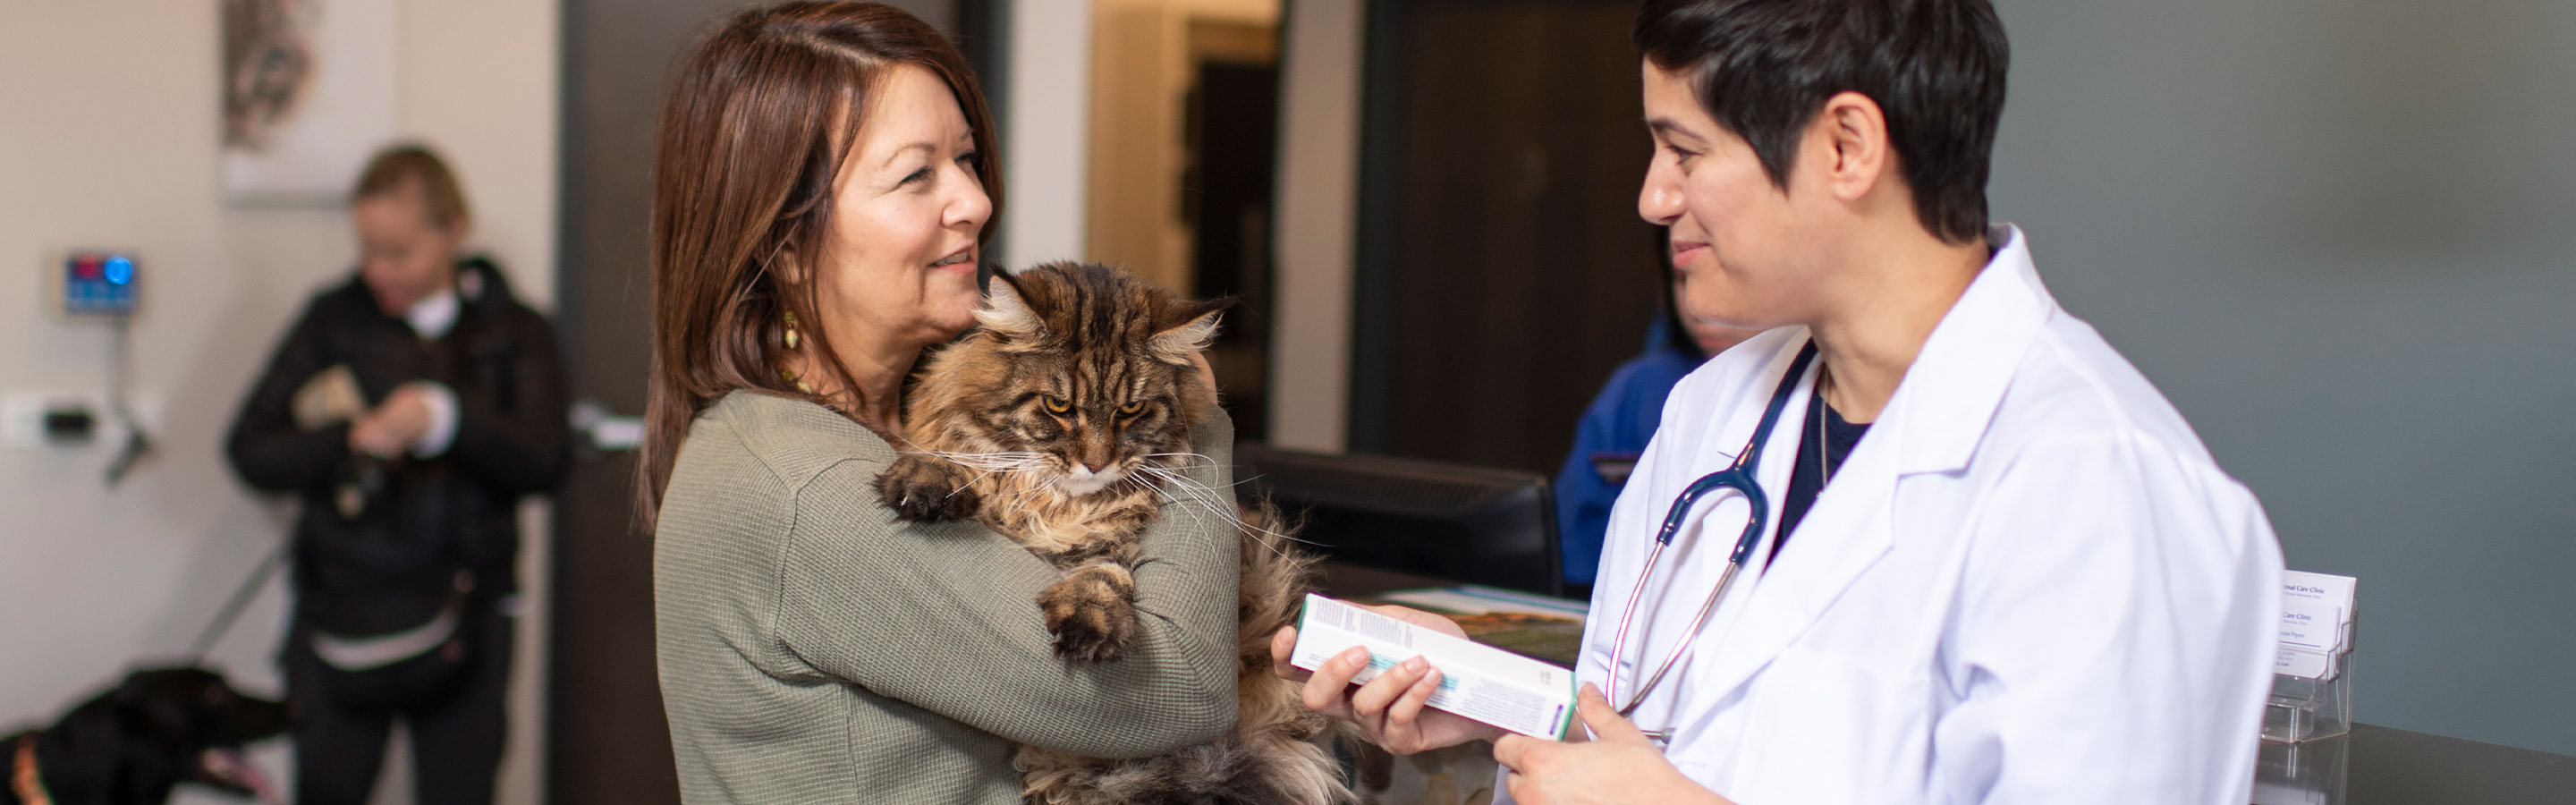 A woman with a pet cat talks with a veterinarian in a veterinary setting.